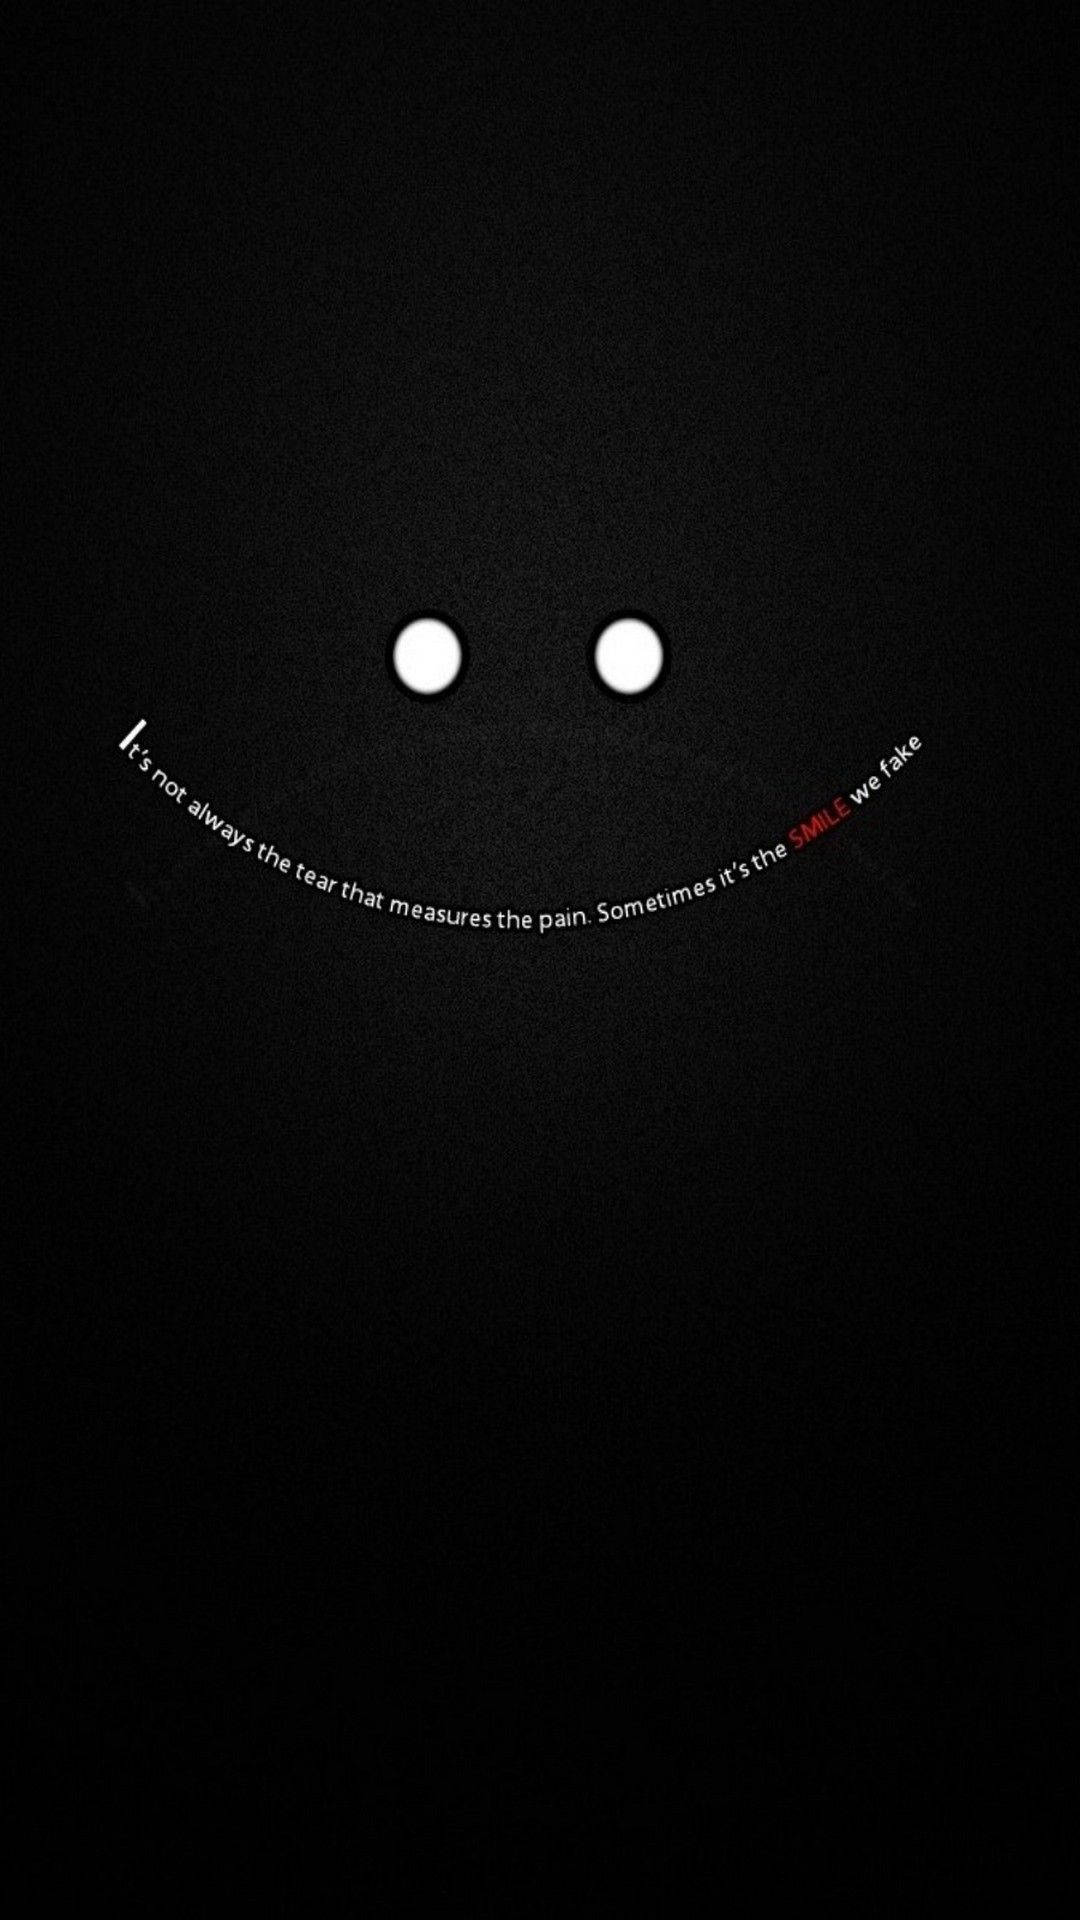 Dark Android Fake Smile Quote Wallpaper